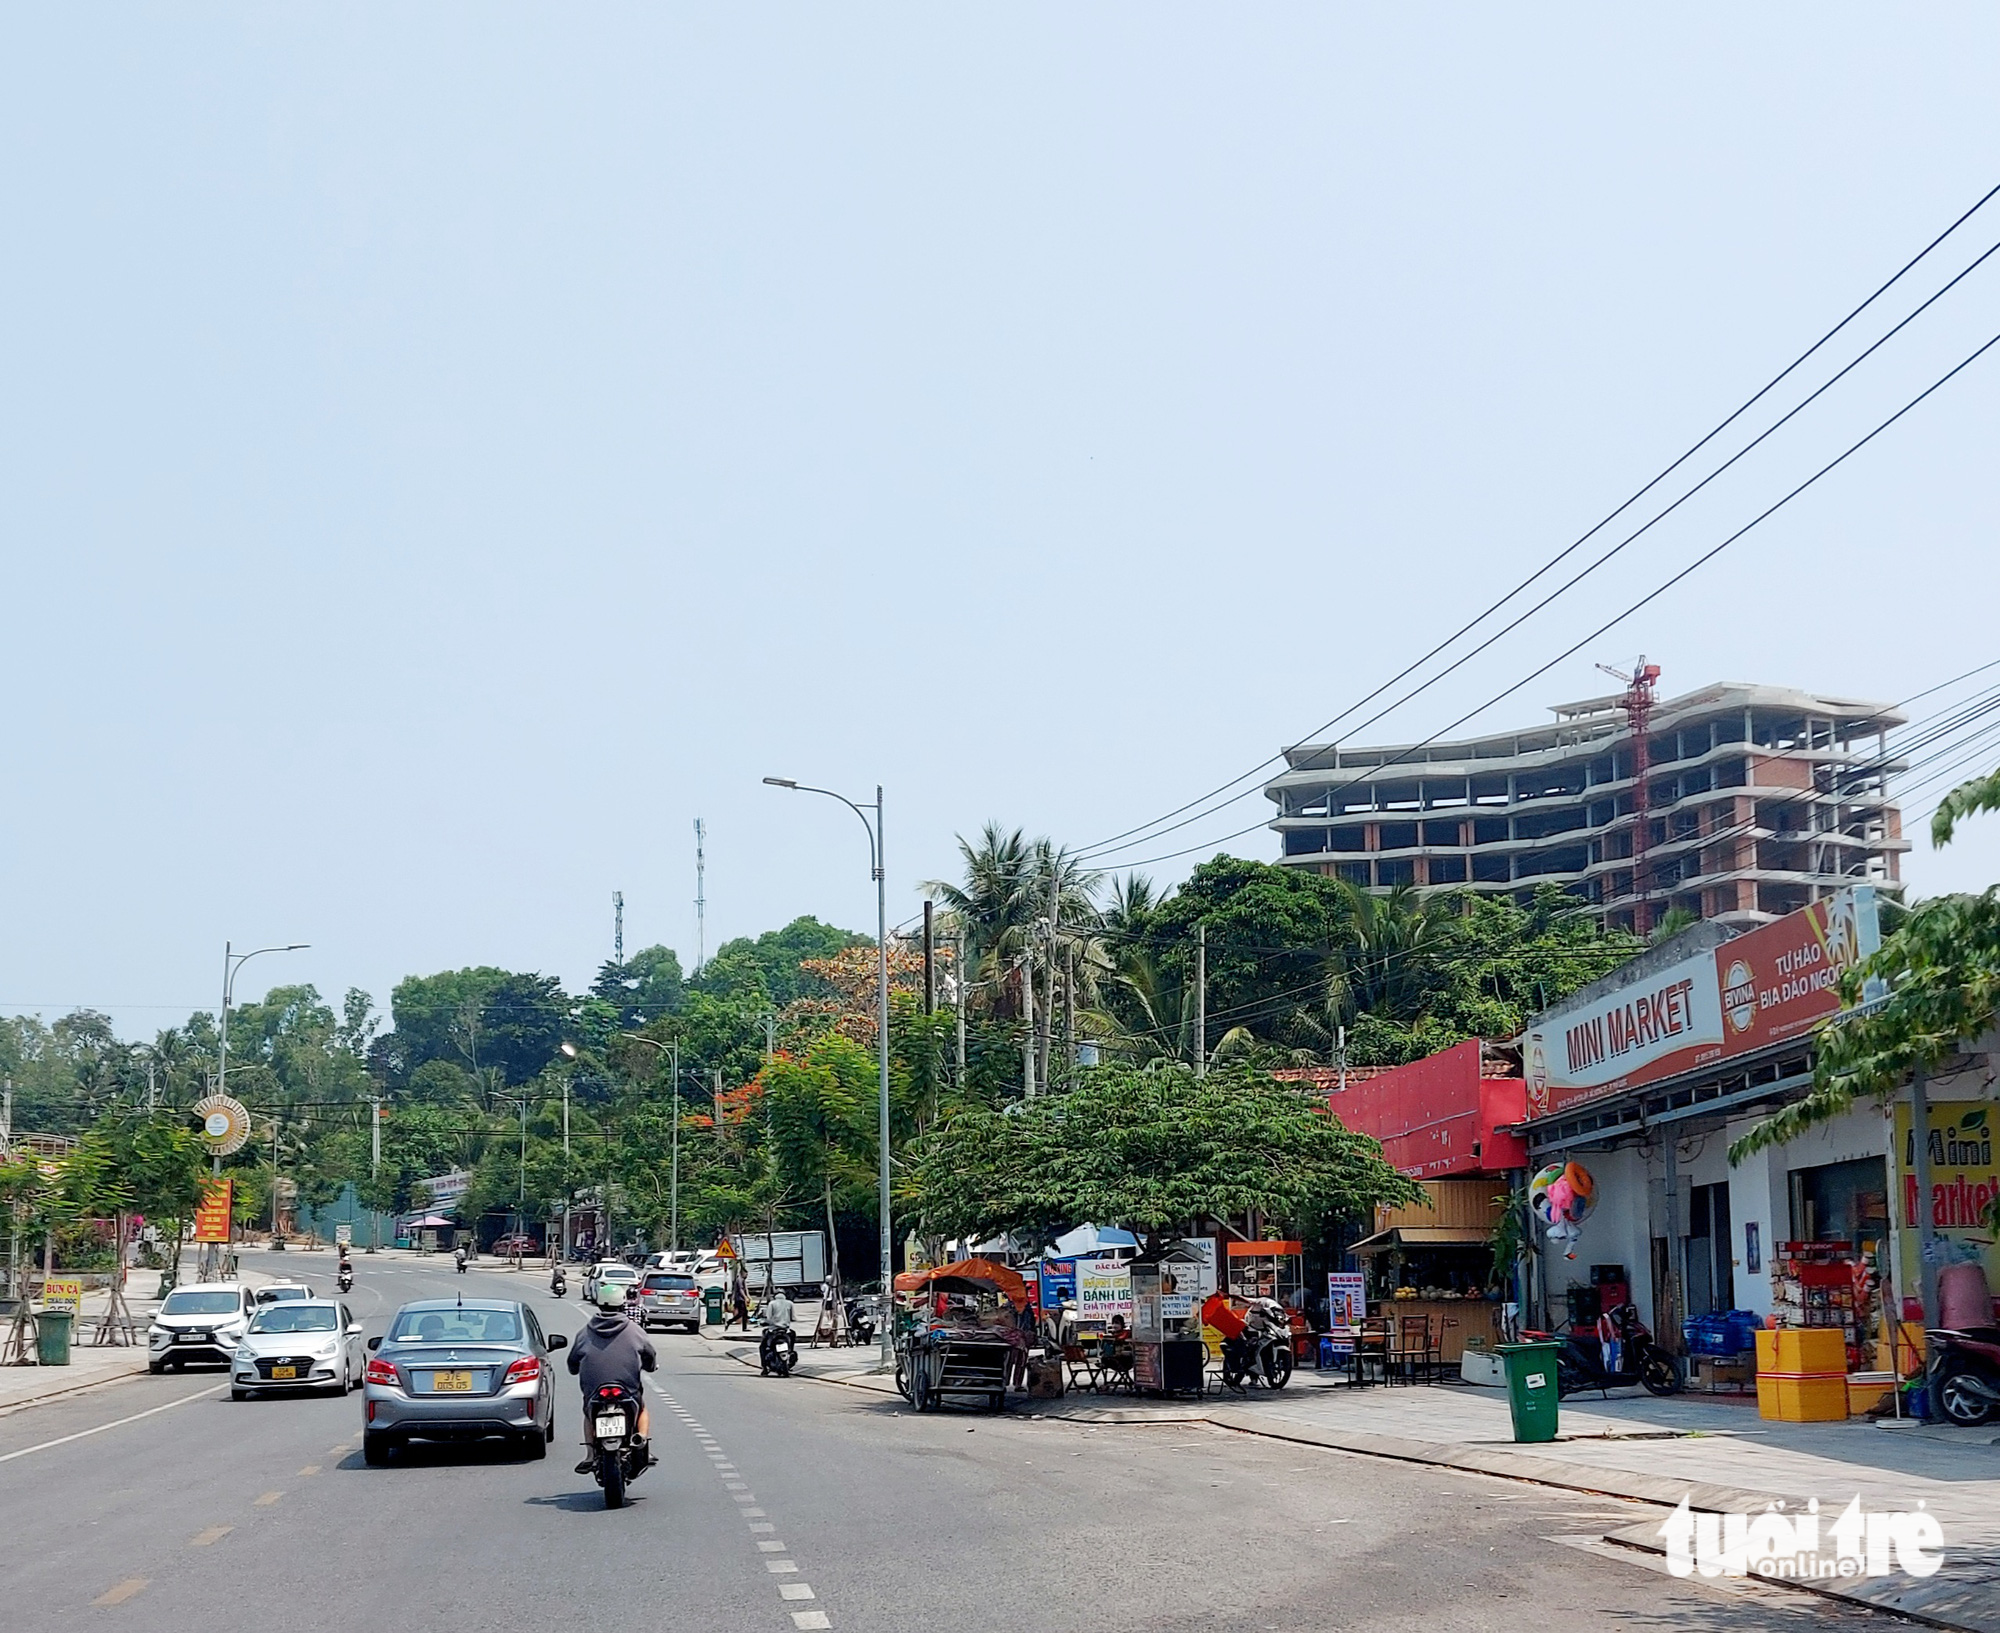 Demolition ordered for illegally-built 12-story building on Vietnam’s Phu Quoc